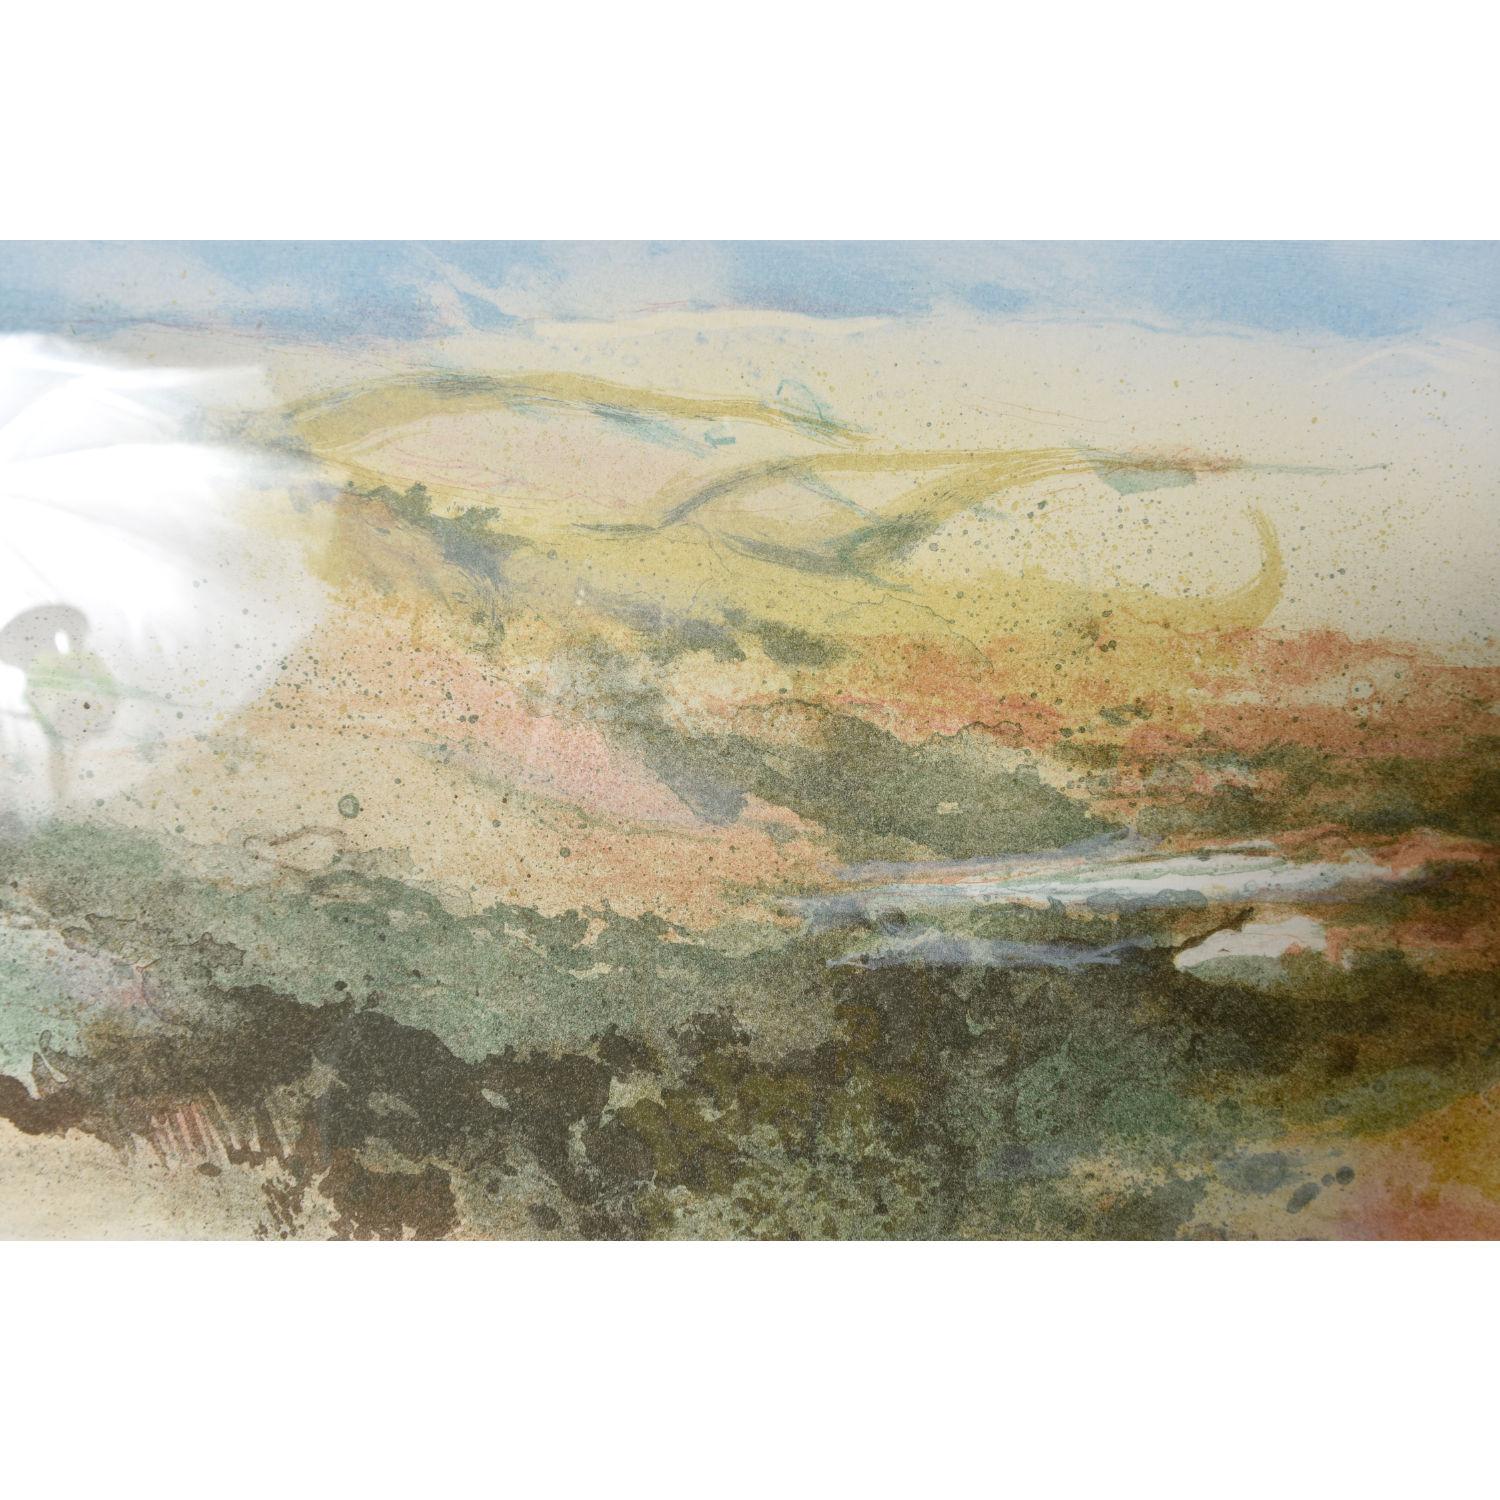 John Maxon Hi Rider Large Watercolor Abstract Landscape Aquatint Etching In Good Condition For Sale In Chattanooga, TN